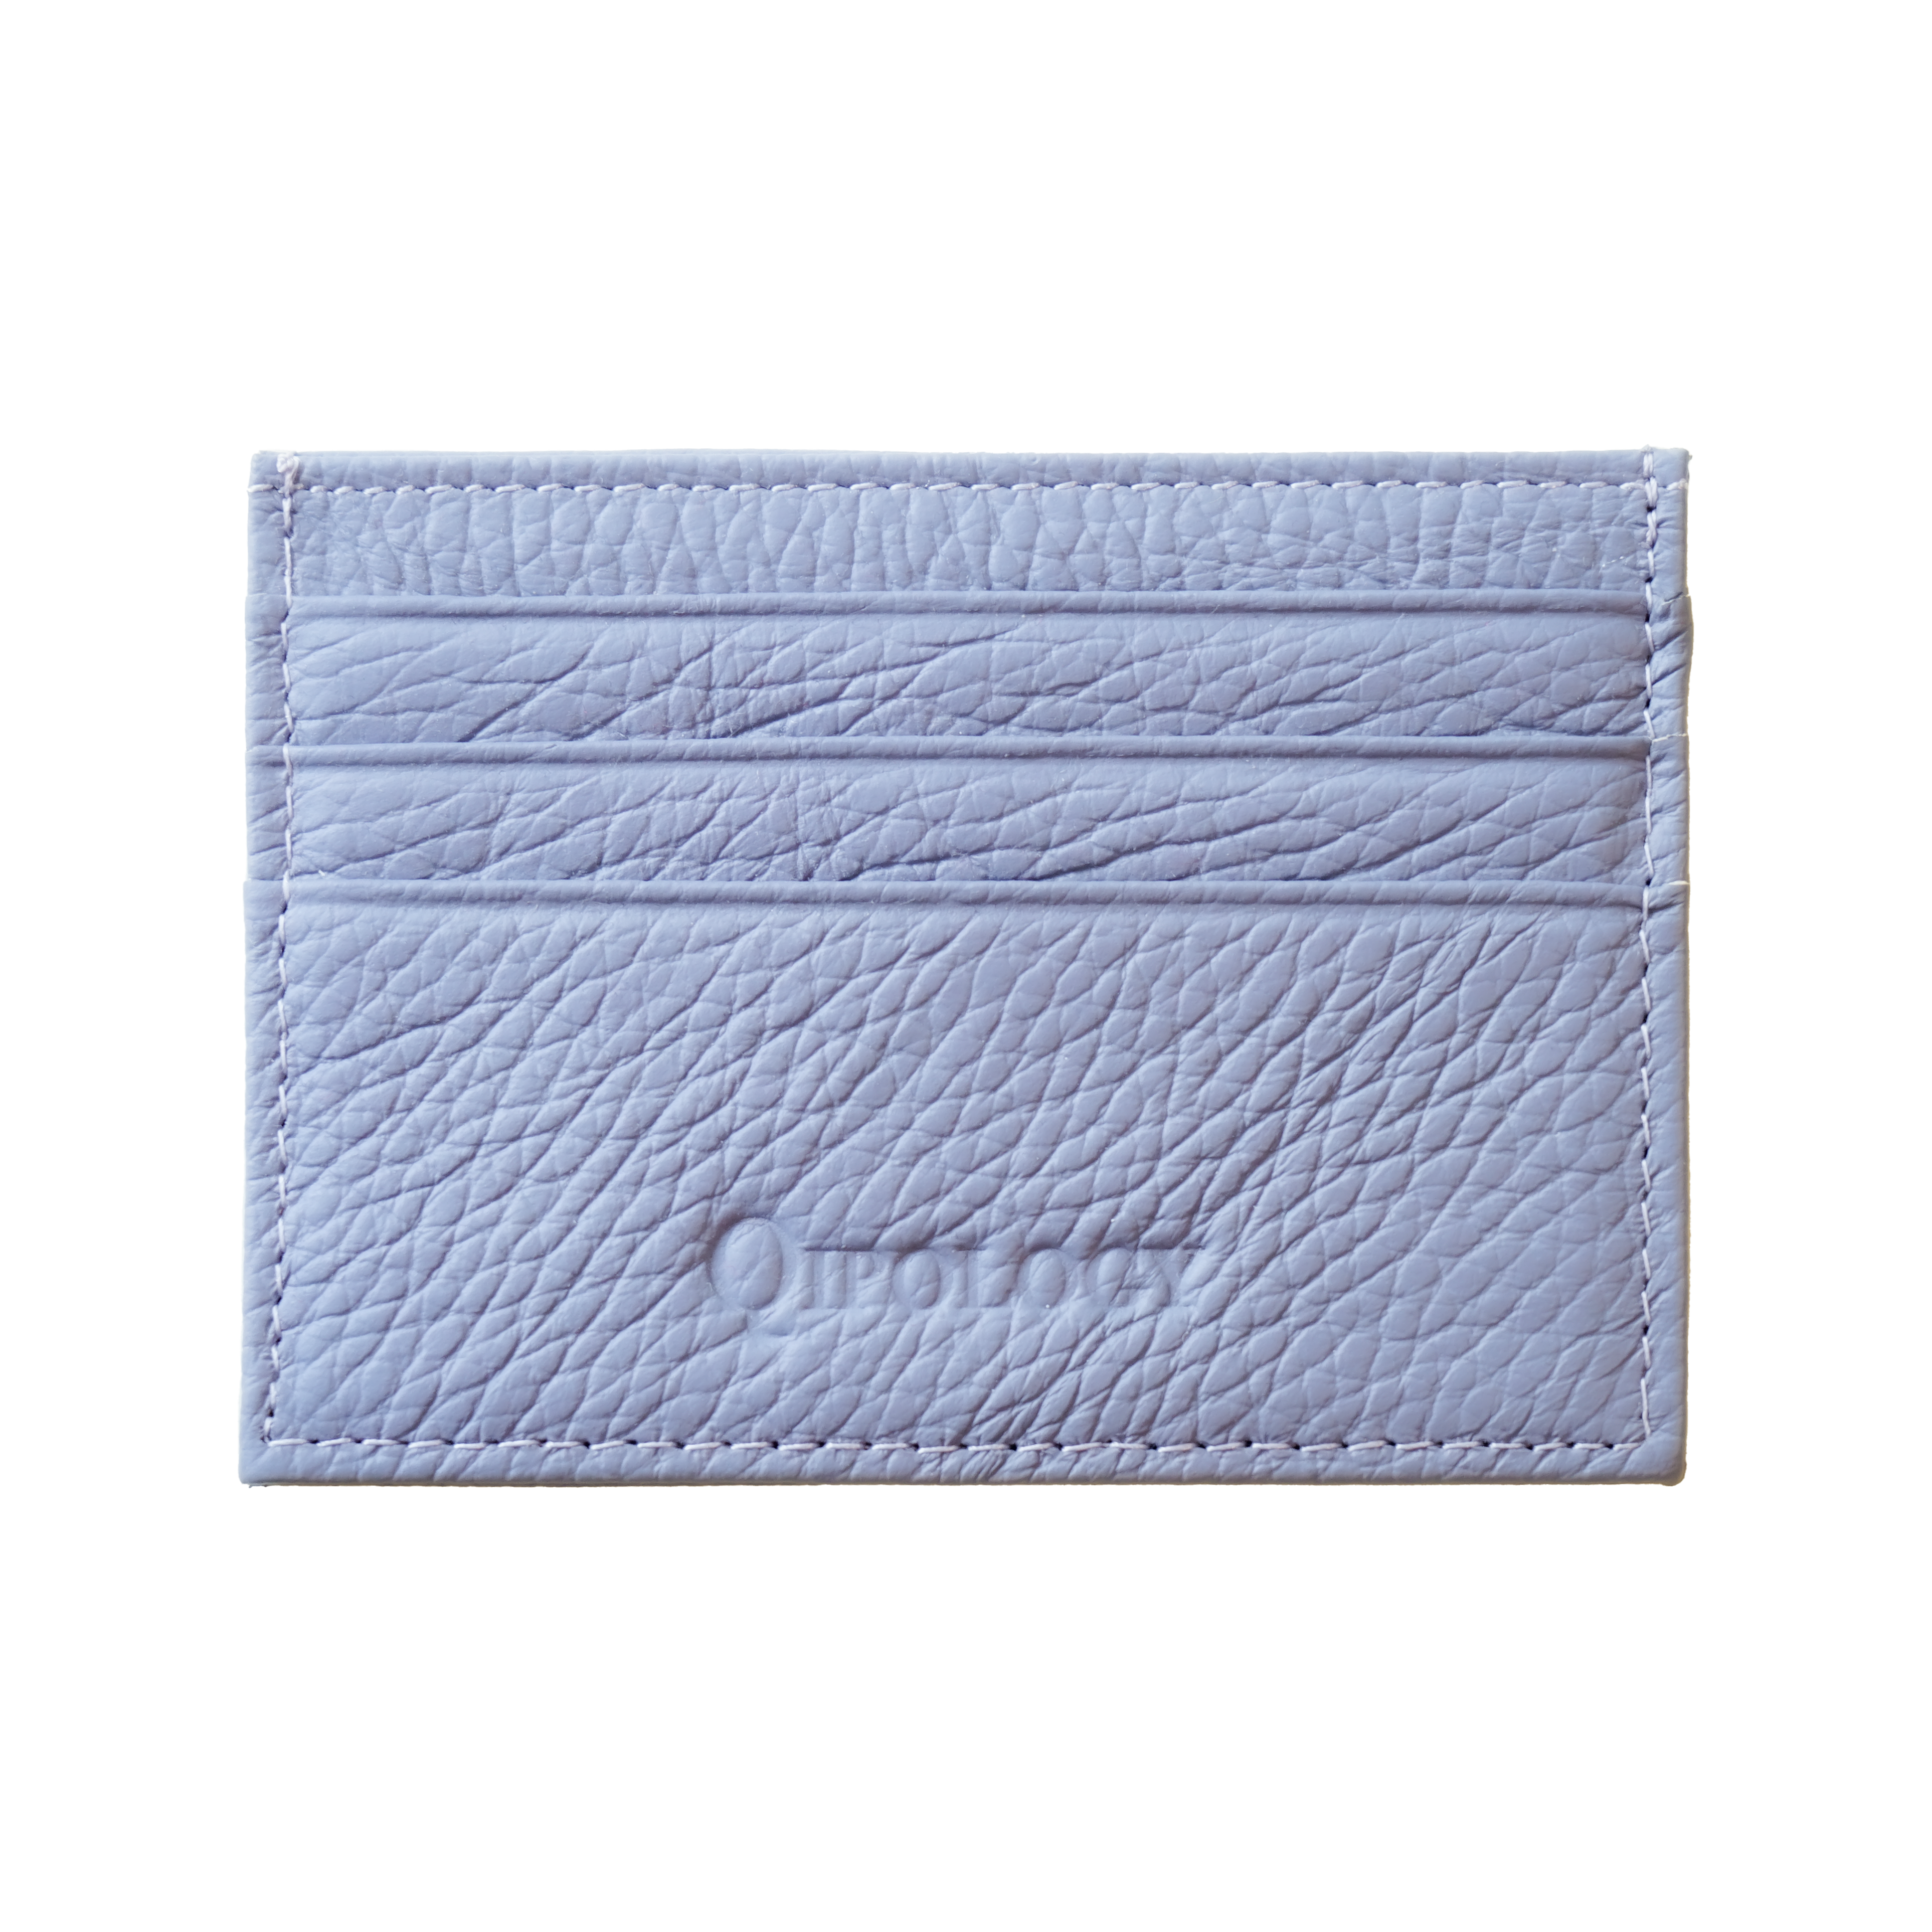 Qipology Leather Cardholder